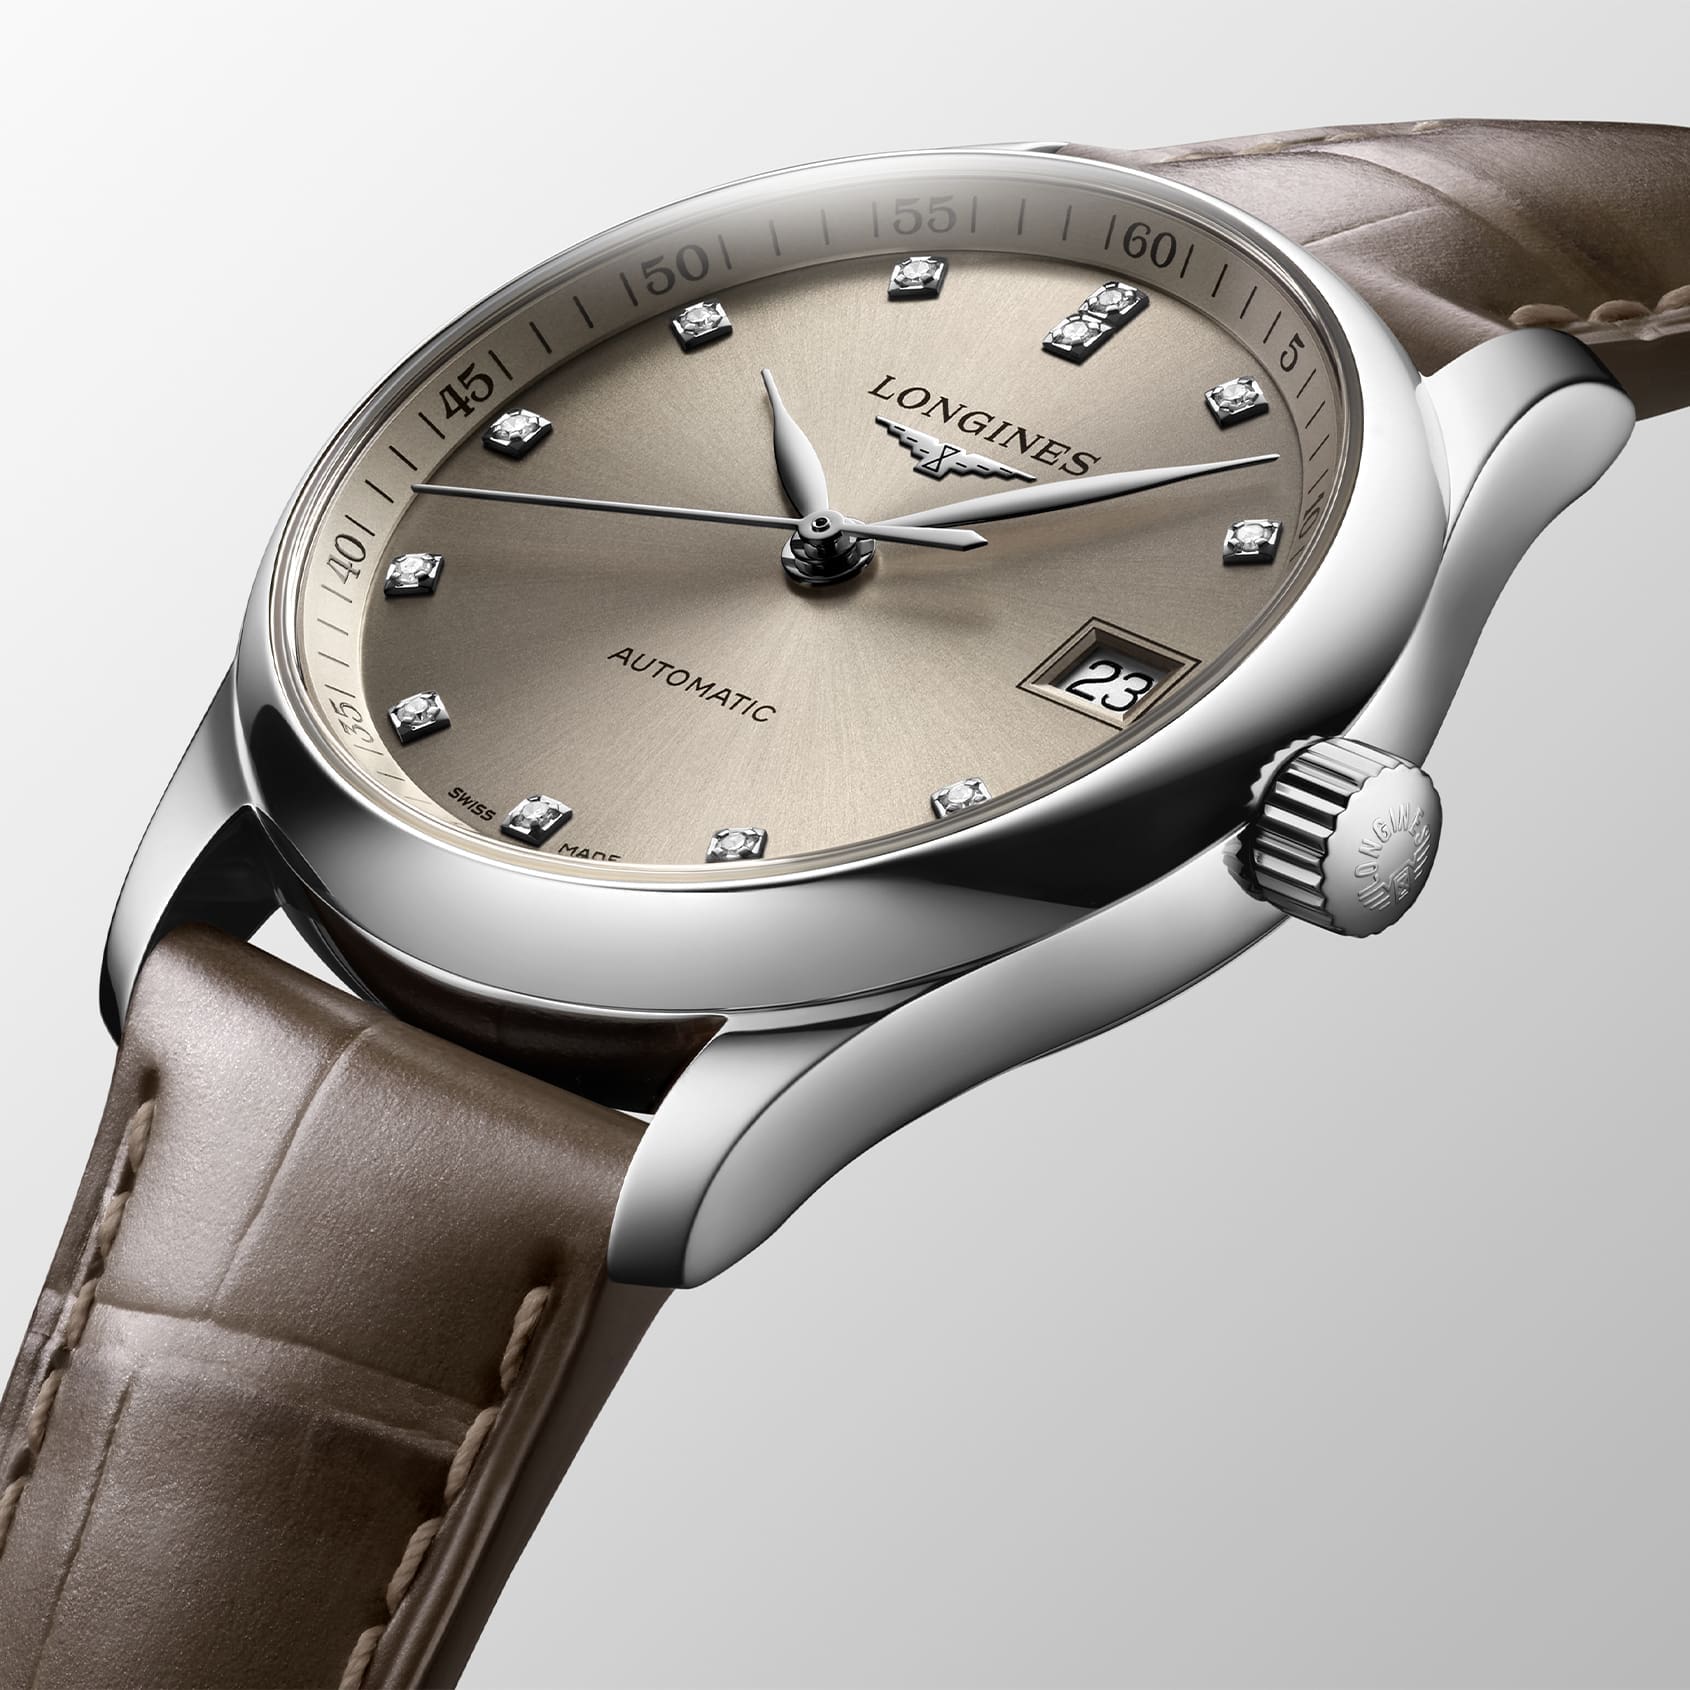 INTRODUCING: The new Longines Master Collection in 34mm